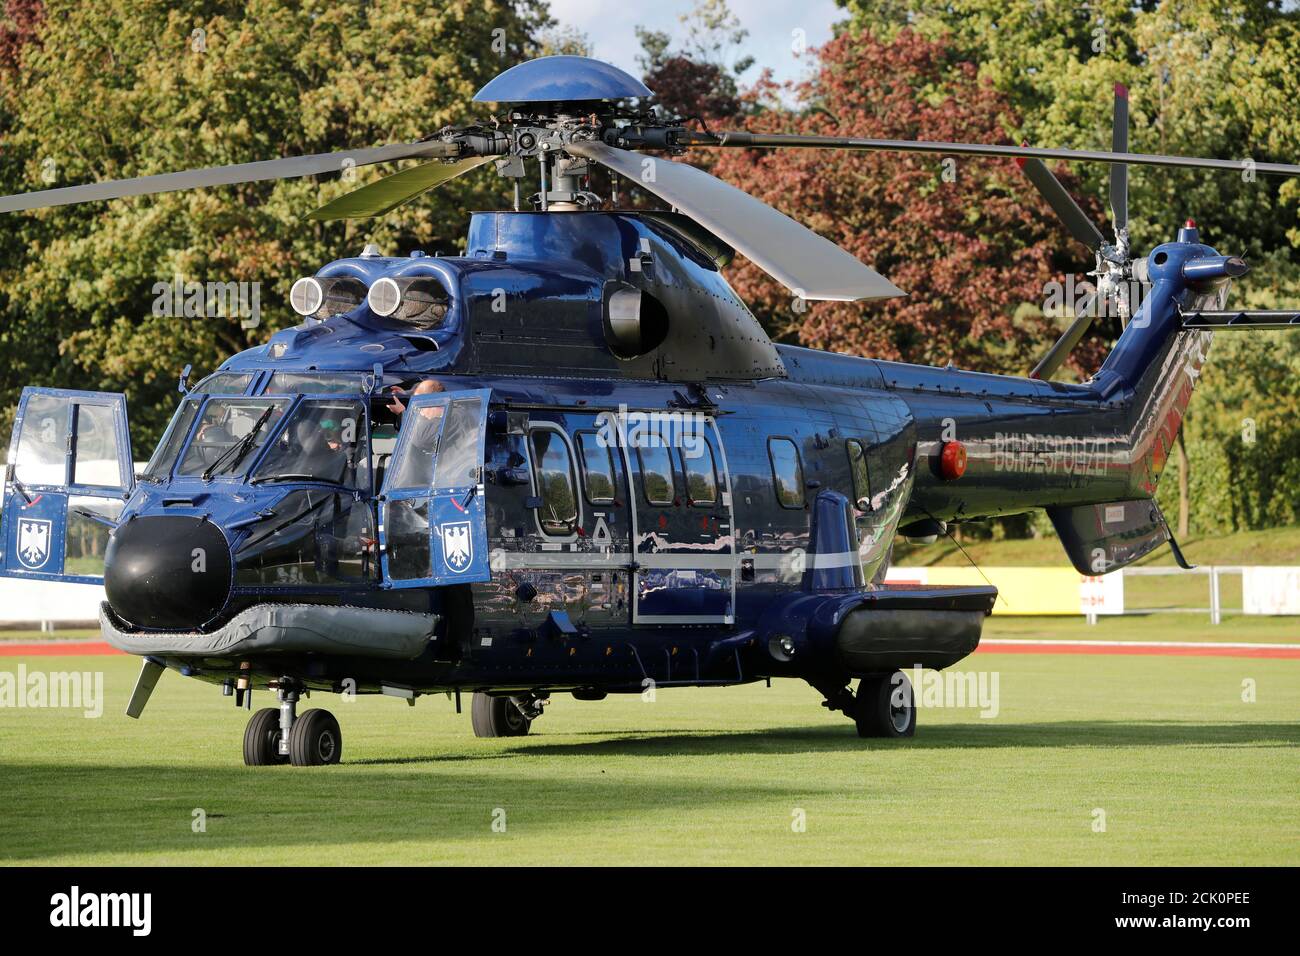 The Super Puma helicopter of Germany's federal police Bundespolizei carries  German Chancellor Angela Merkel, a top candidate of the Christian  Democratic Union Party (CDU) for the upcoming general elections, following  an election